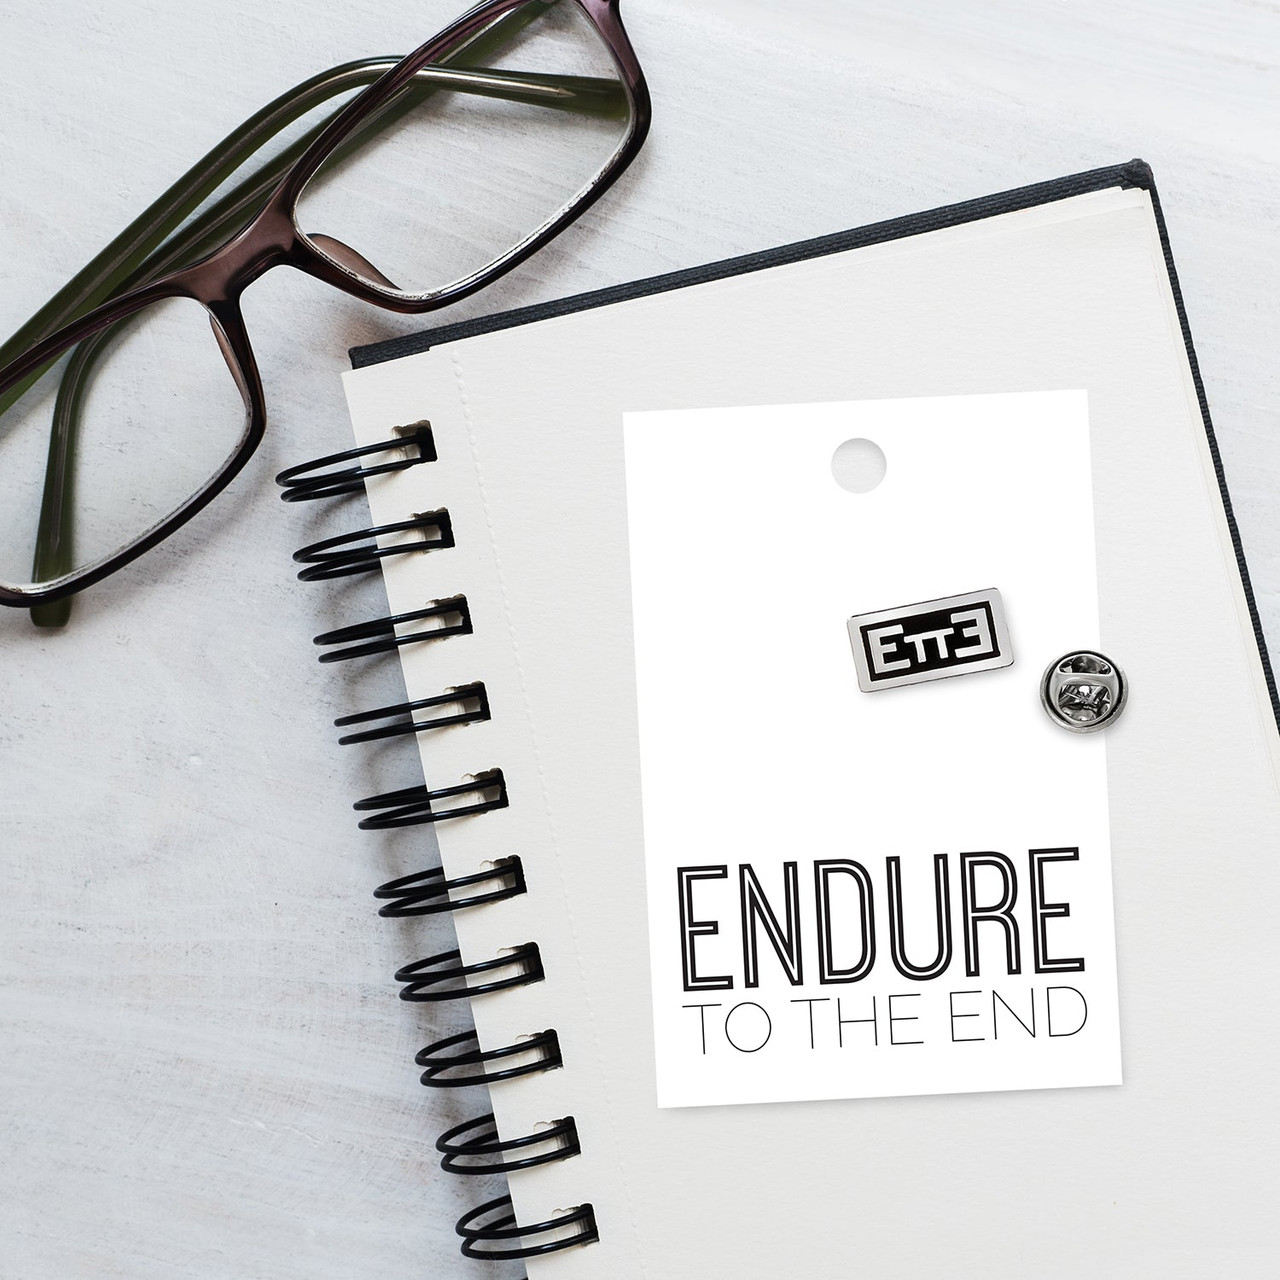 Endure to the End (Tie Pin) While supplies last*